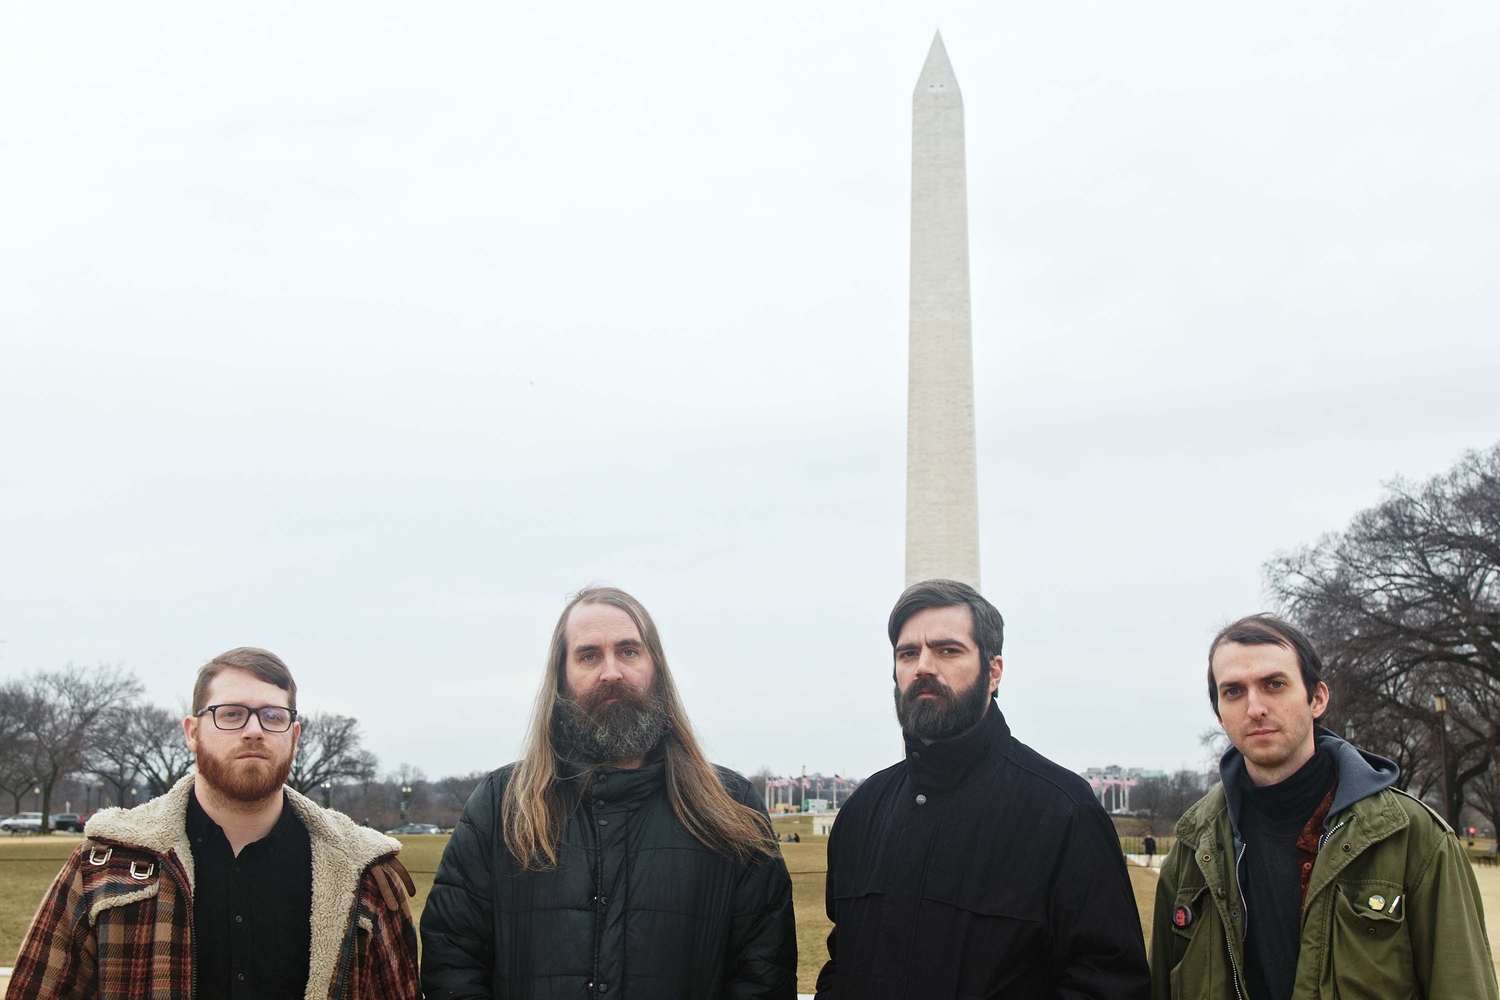 Titus Andronicus share details of new album ‘An Obelisk’